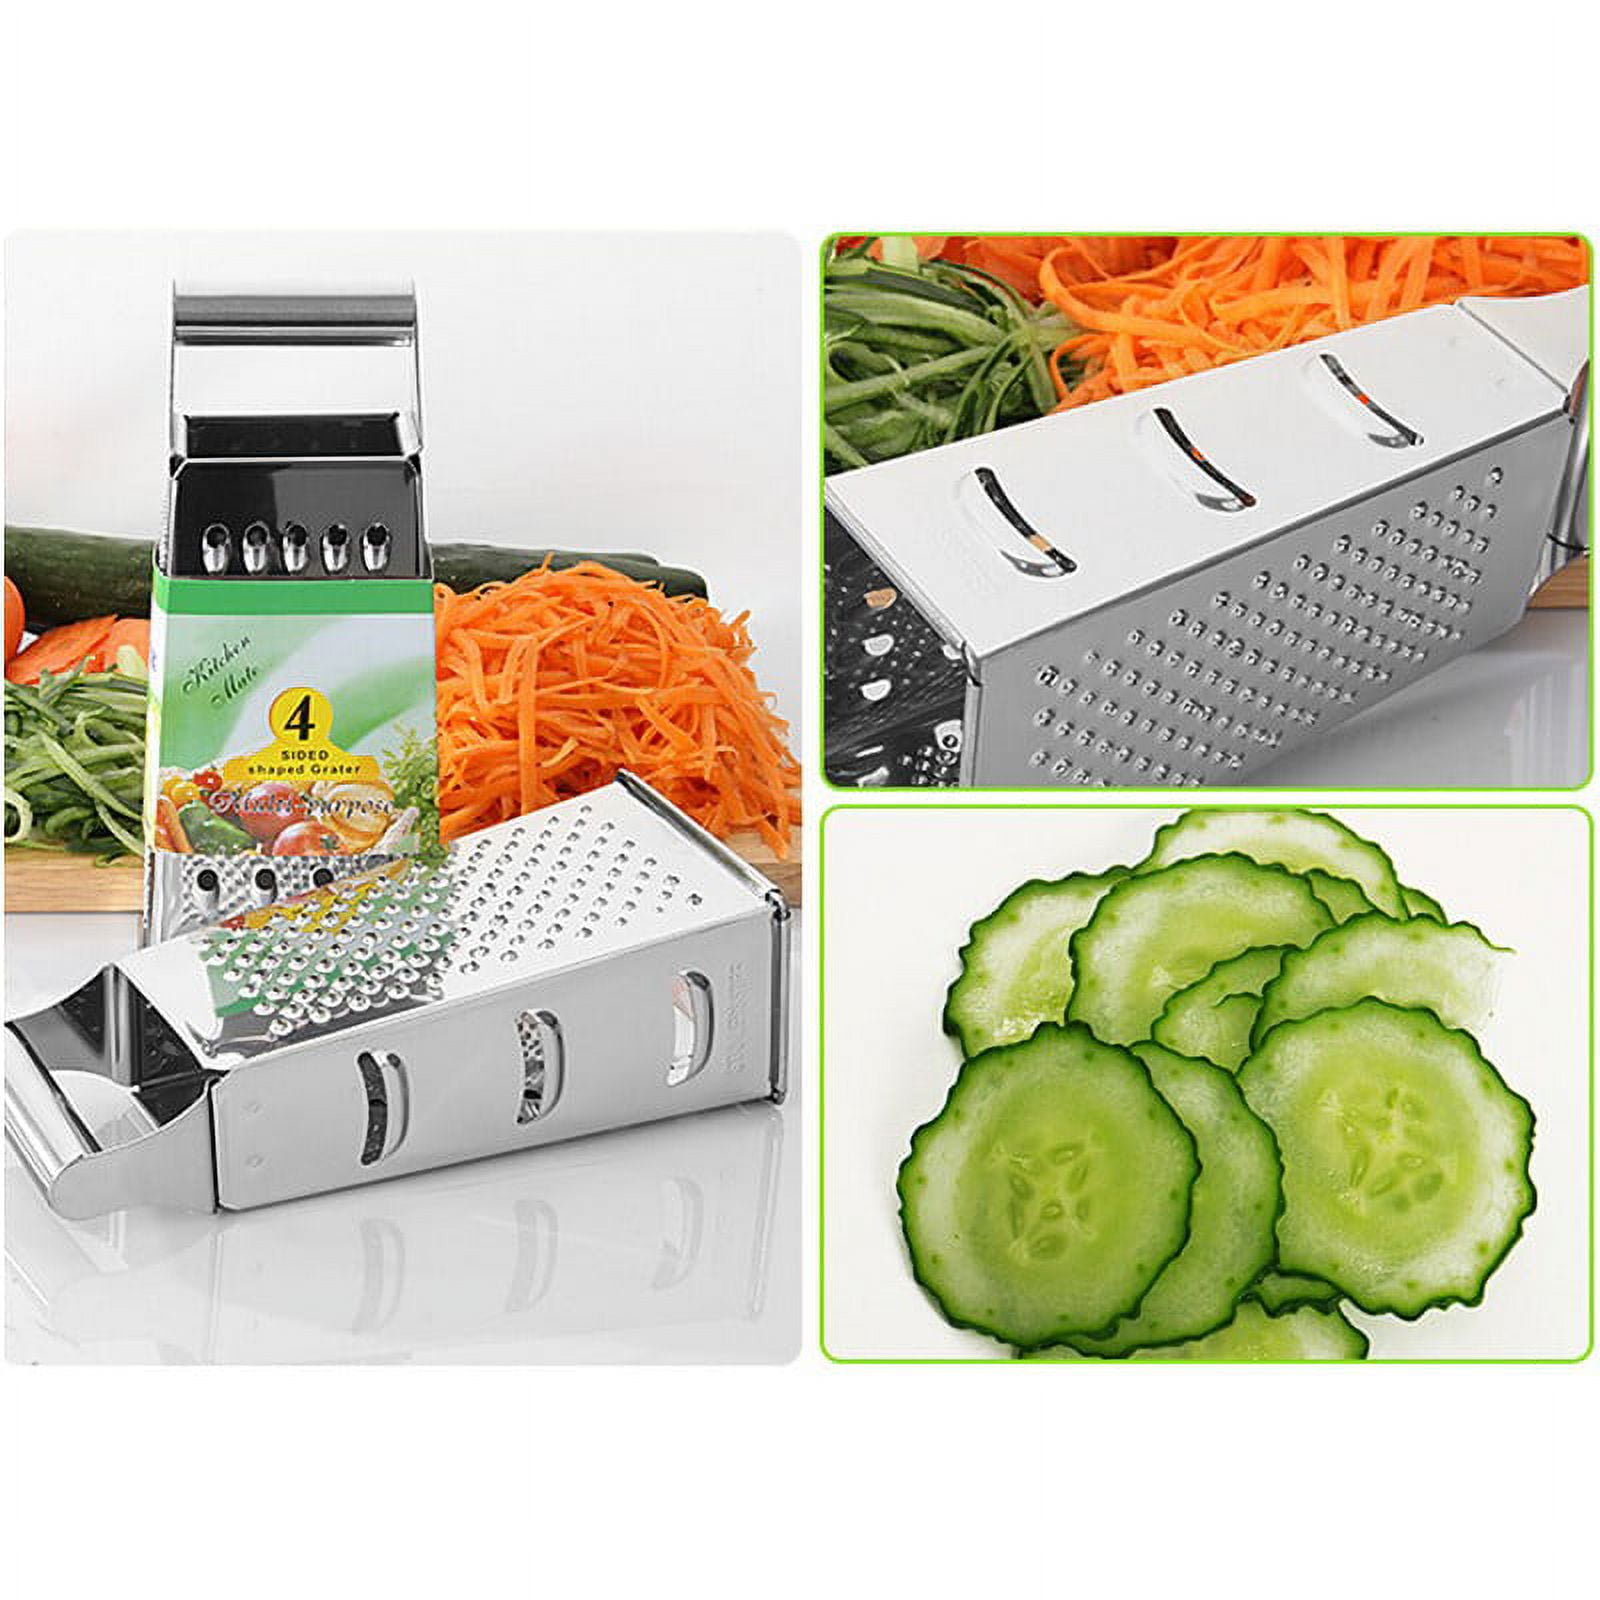 1111Fourone Cheese Grater Stainless Gadget Fruit Vegetable Carrot